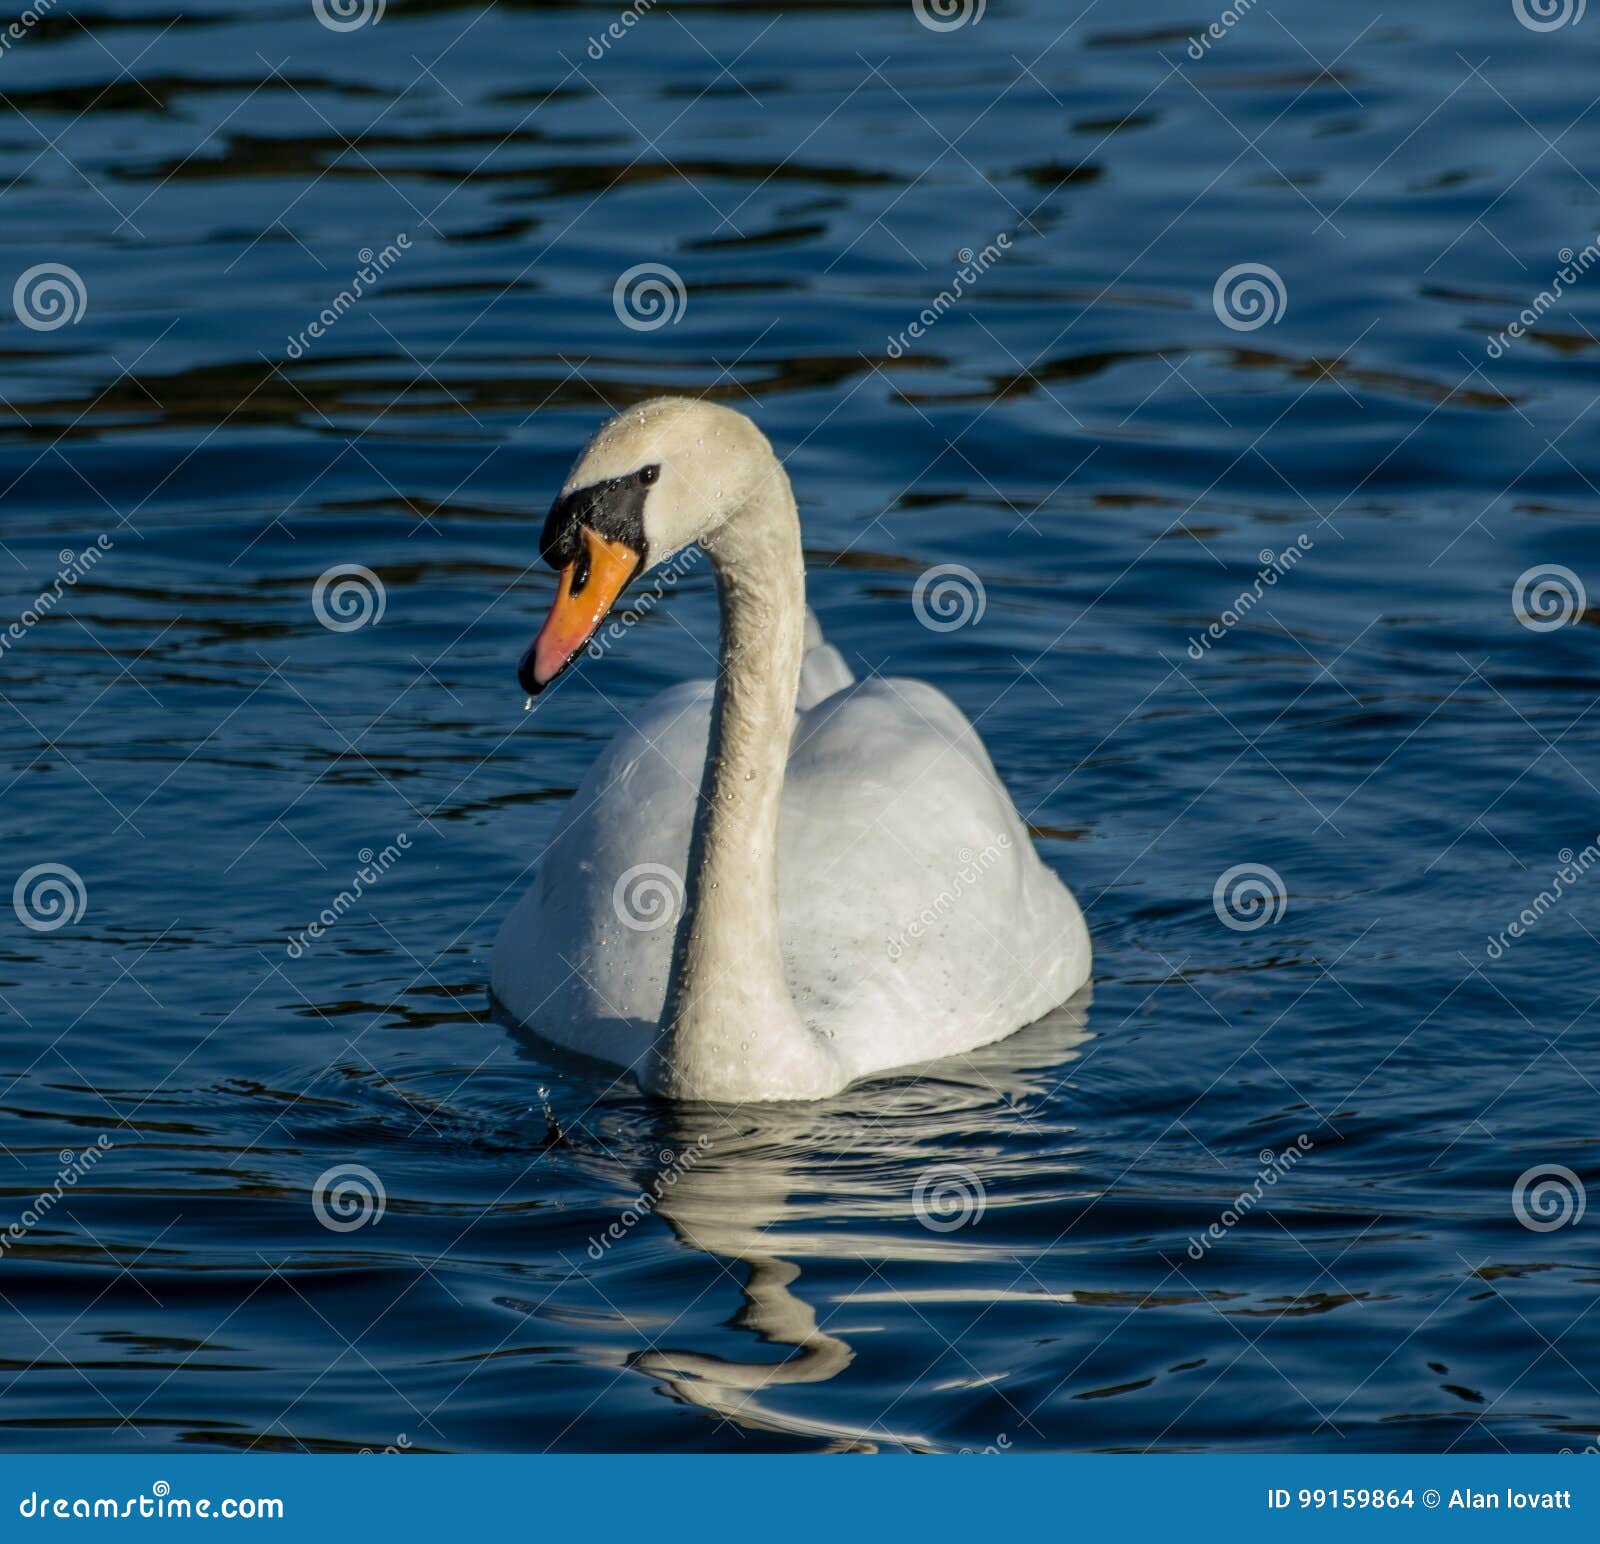 mute swan on a lake in bedfordshire